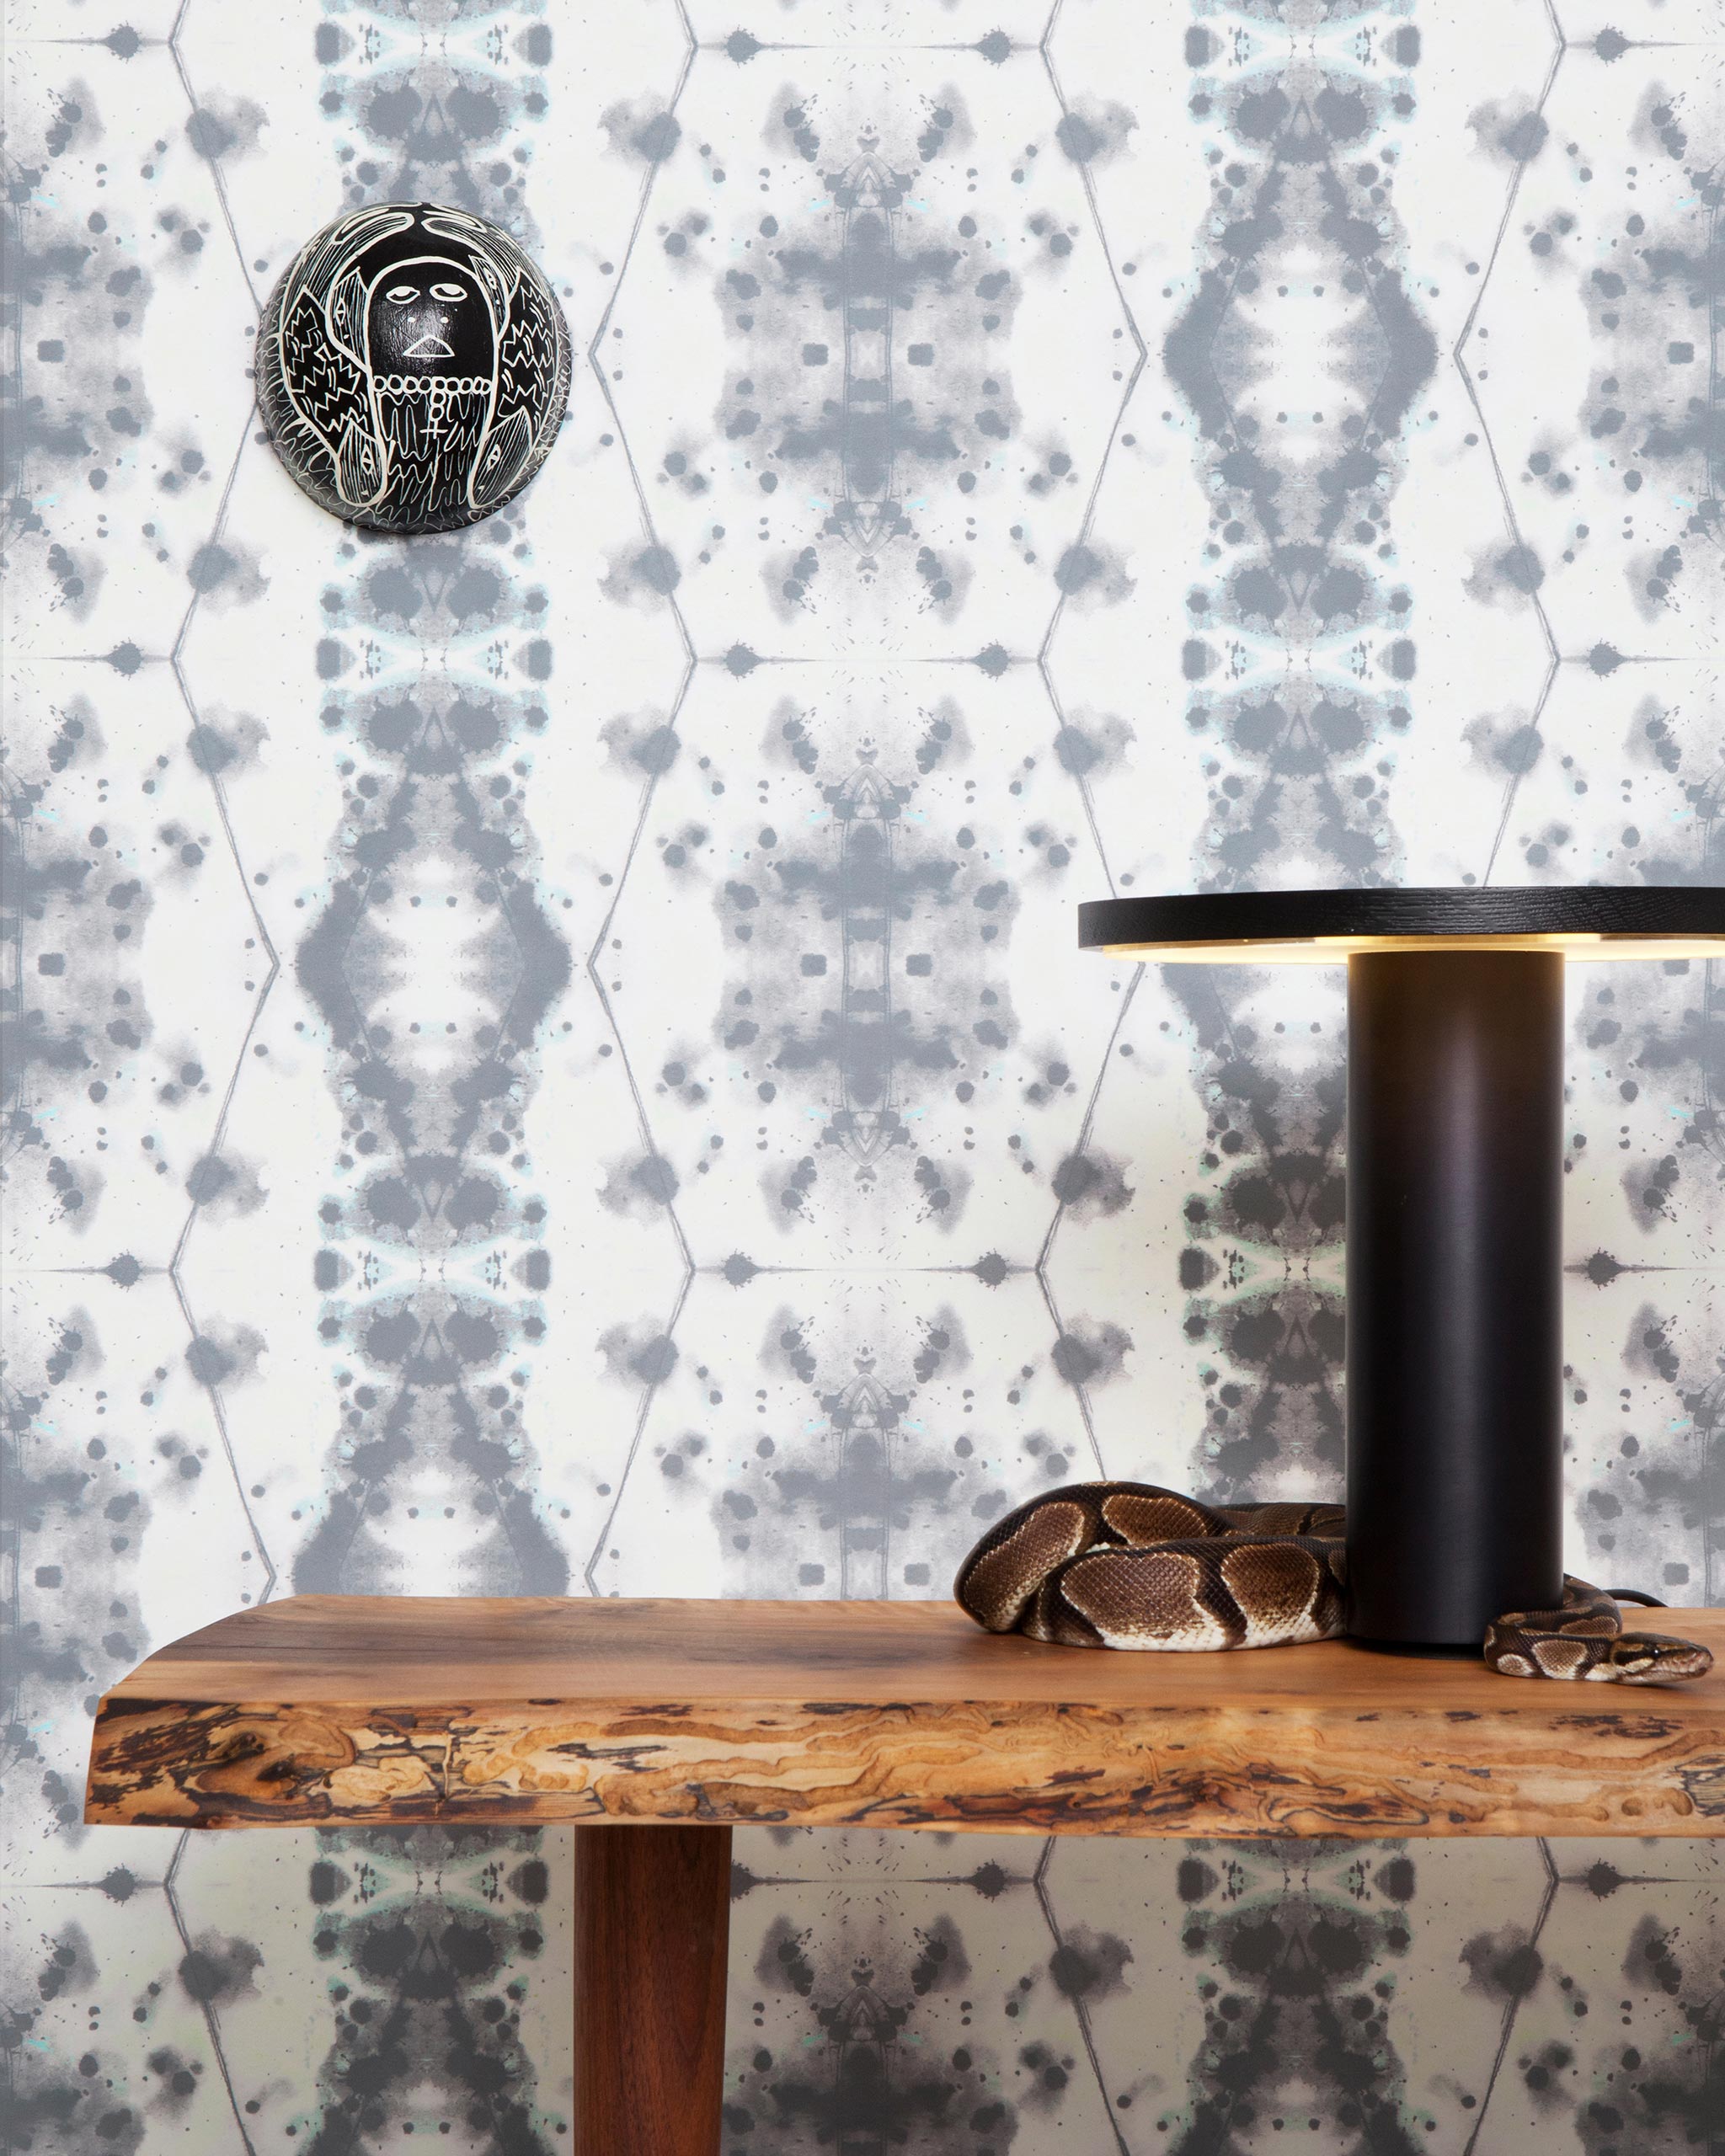 A wooden table with a snake on it stands in front of a wall papered in a painterly gometric stripe in gray, blue and cream.